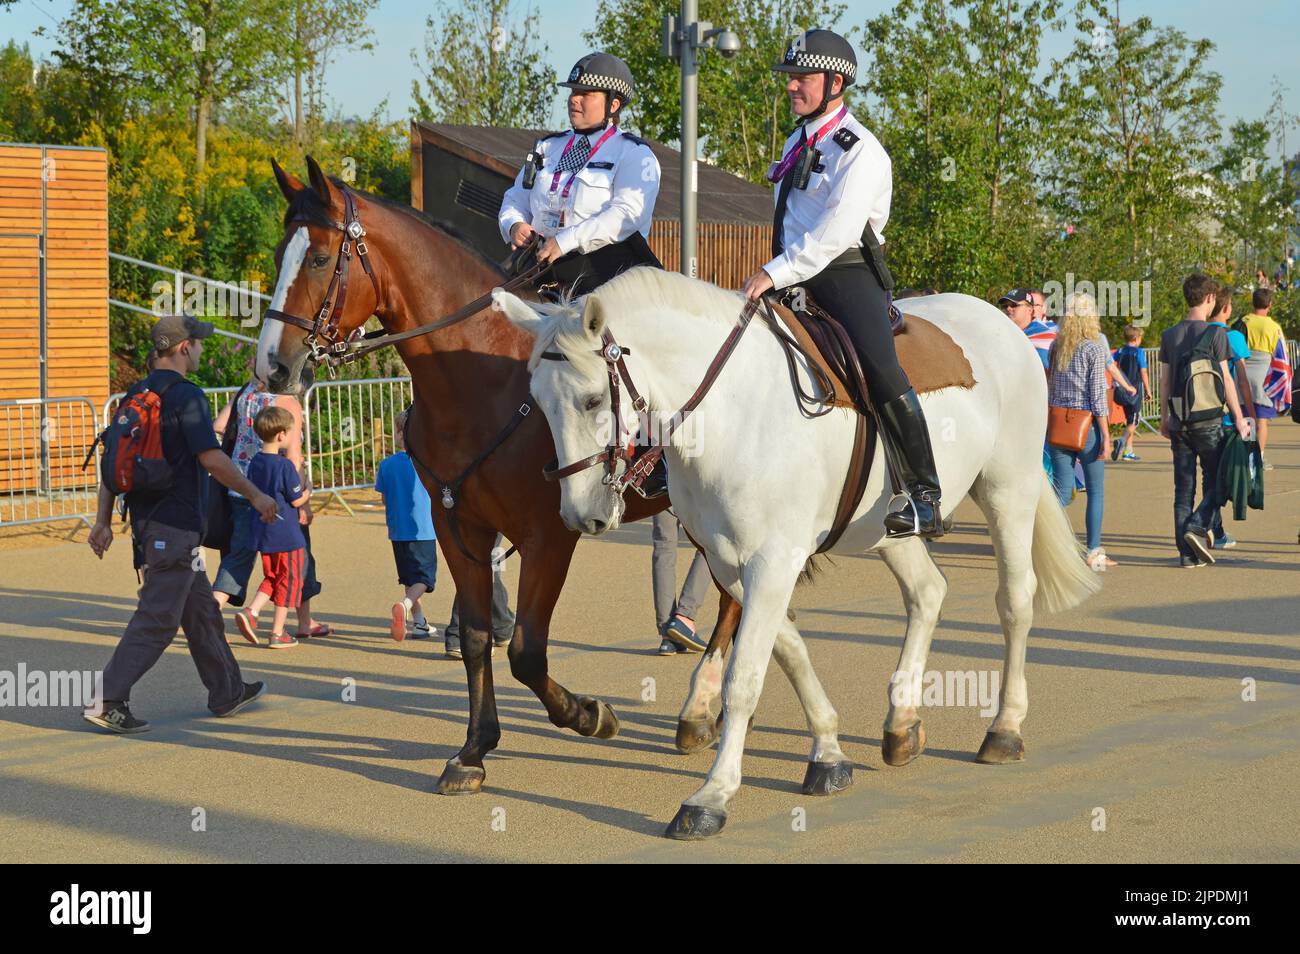 Metropolitan Police mounted female & male officers London 2012 Olympic Paralympic Games on horseback in Queen Elizabeth Olympic Park Stratford UK Stock Photo